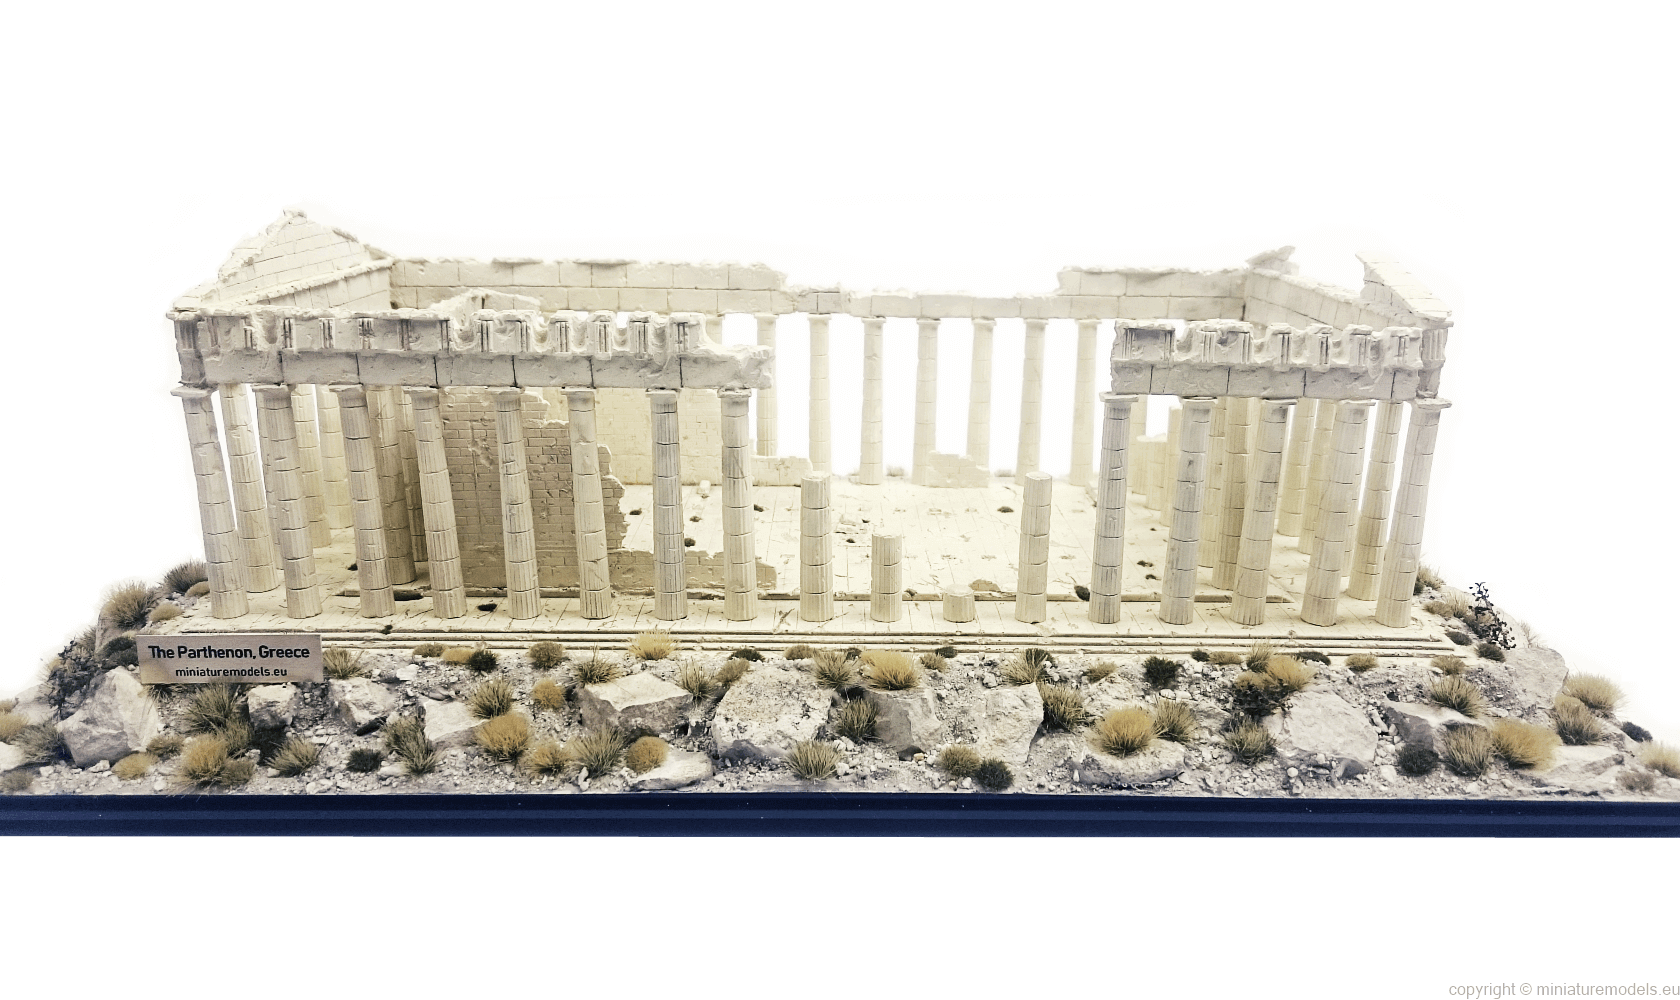 South view of the Parthenon model